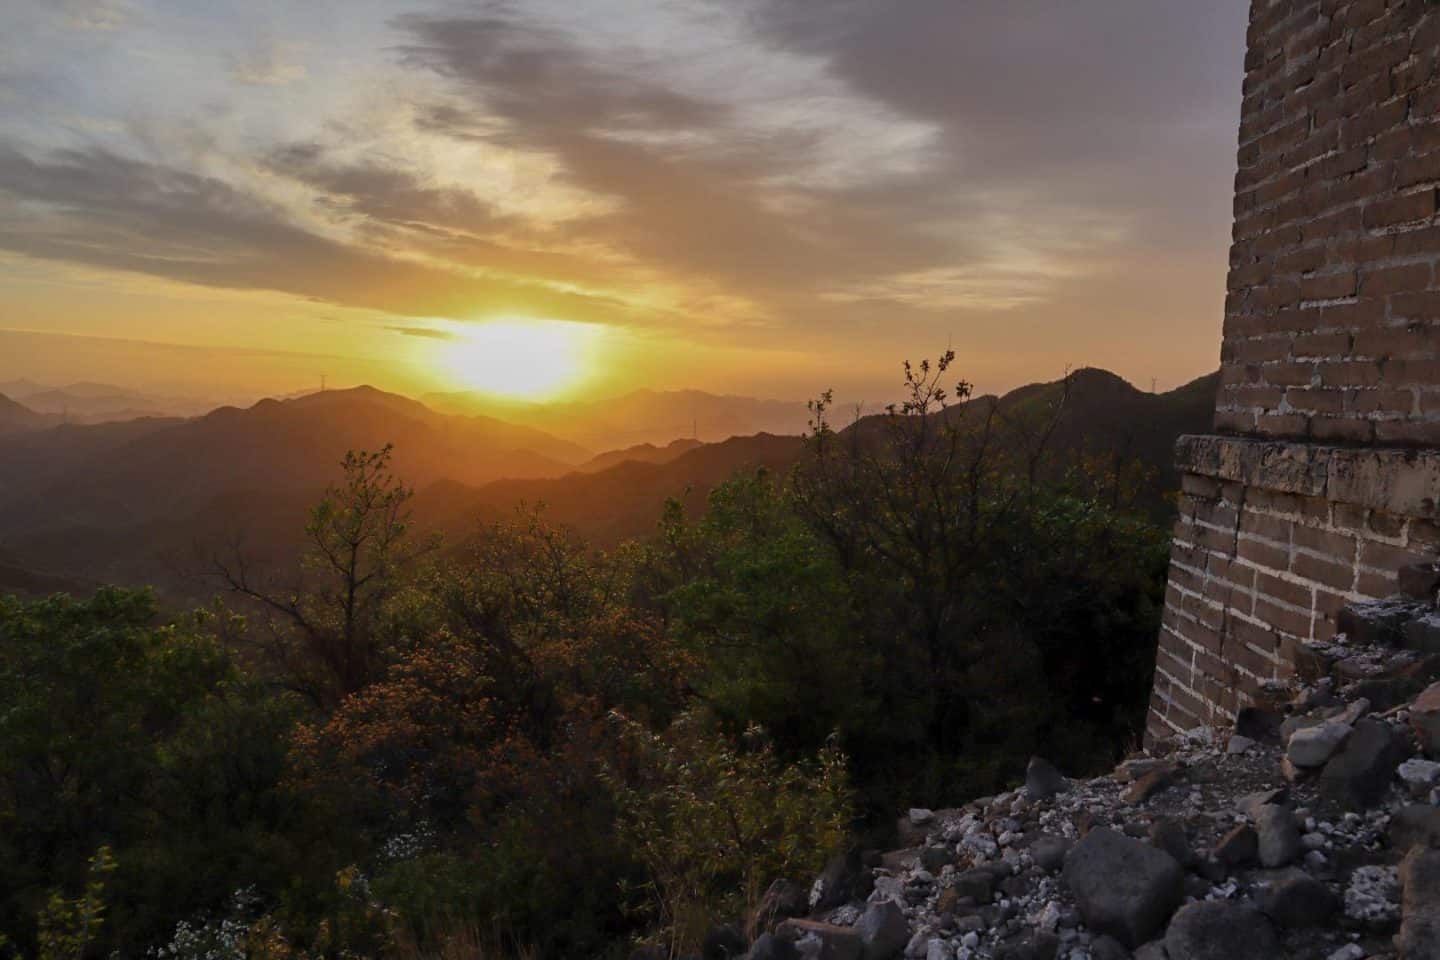 camping on Great Wall of China, sunrise